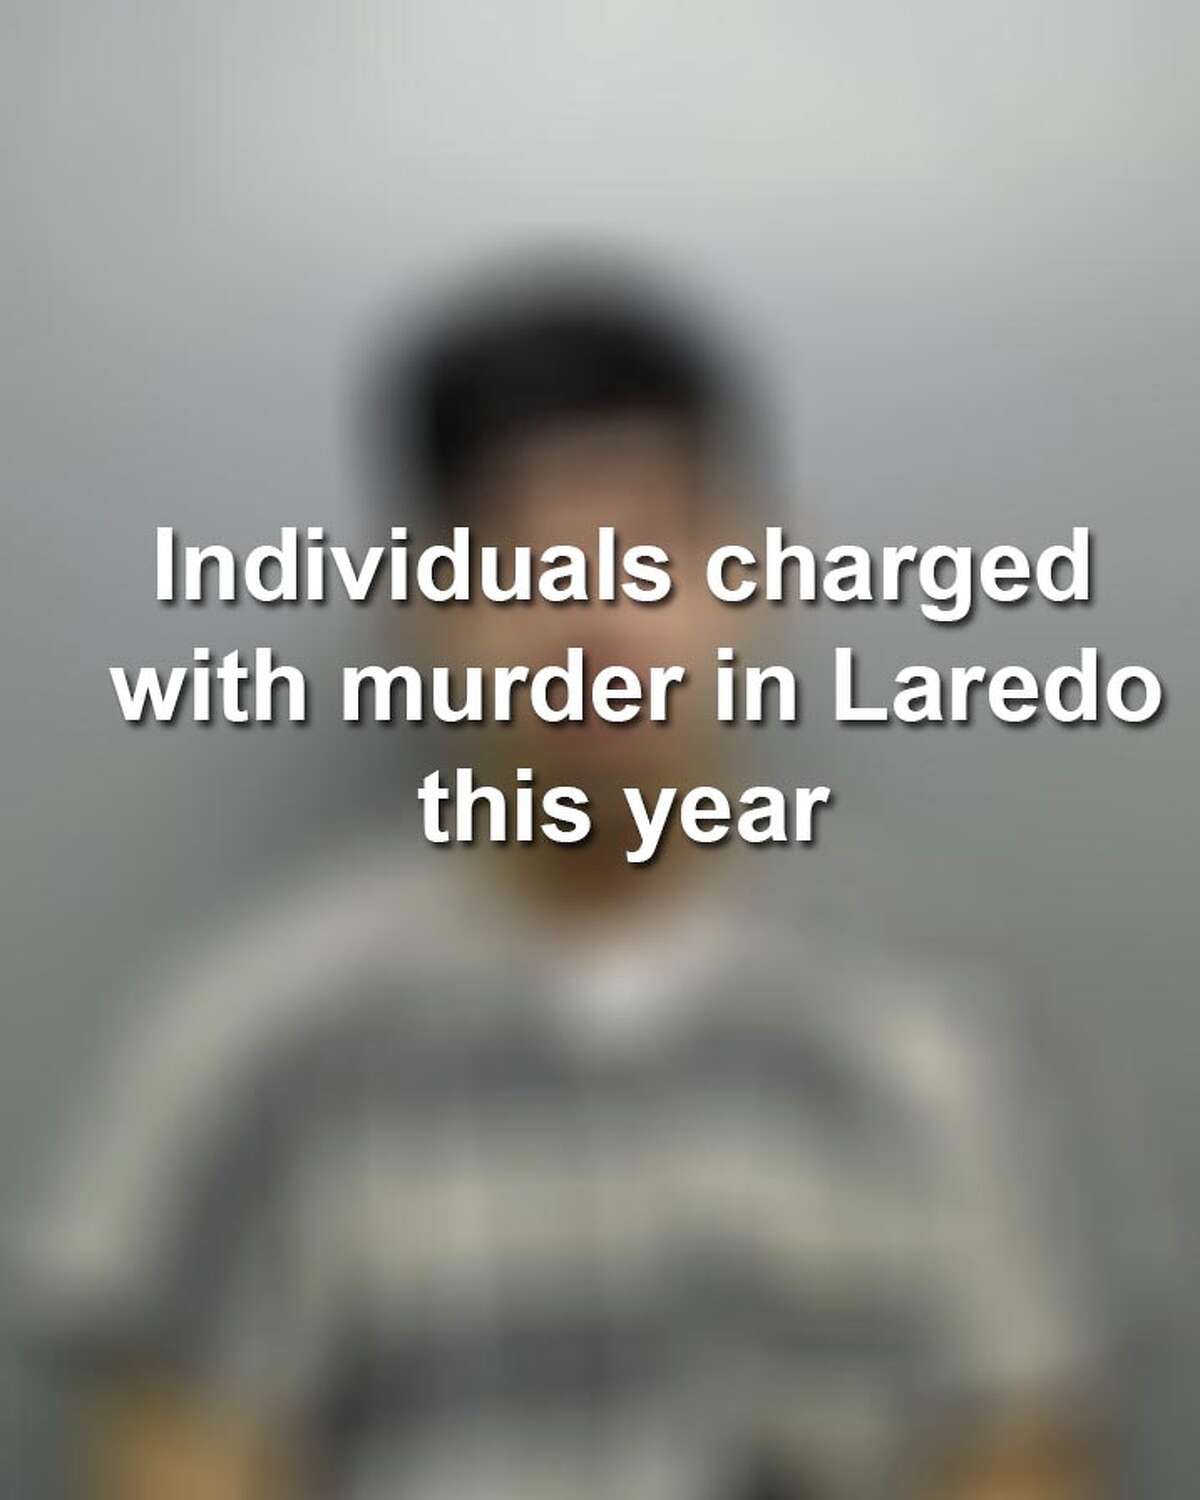 Keep scrolling to see the individuals arrested and charged with murder in Laredo in 2018.